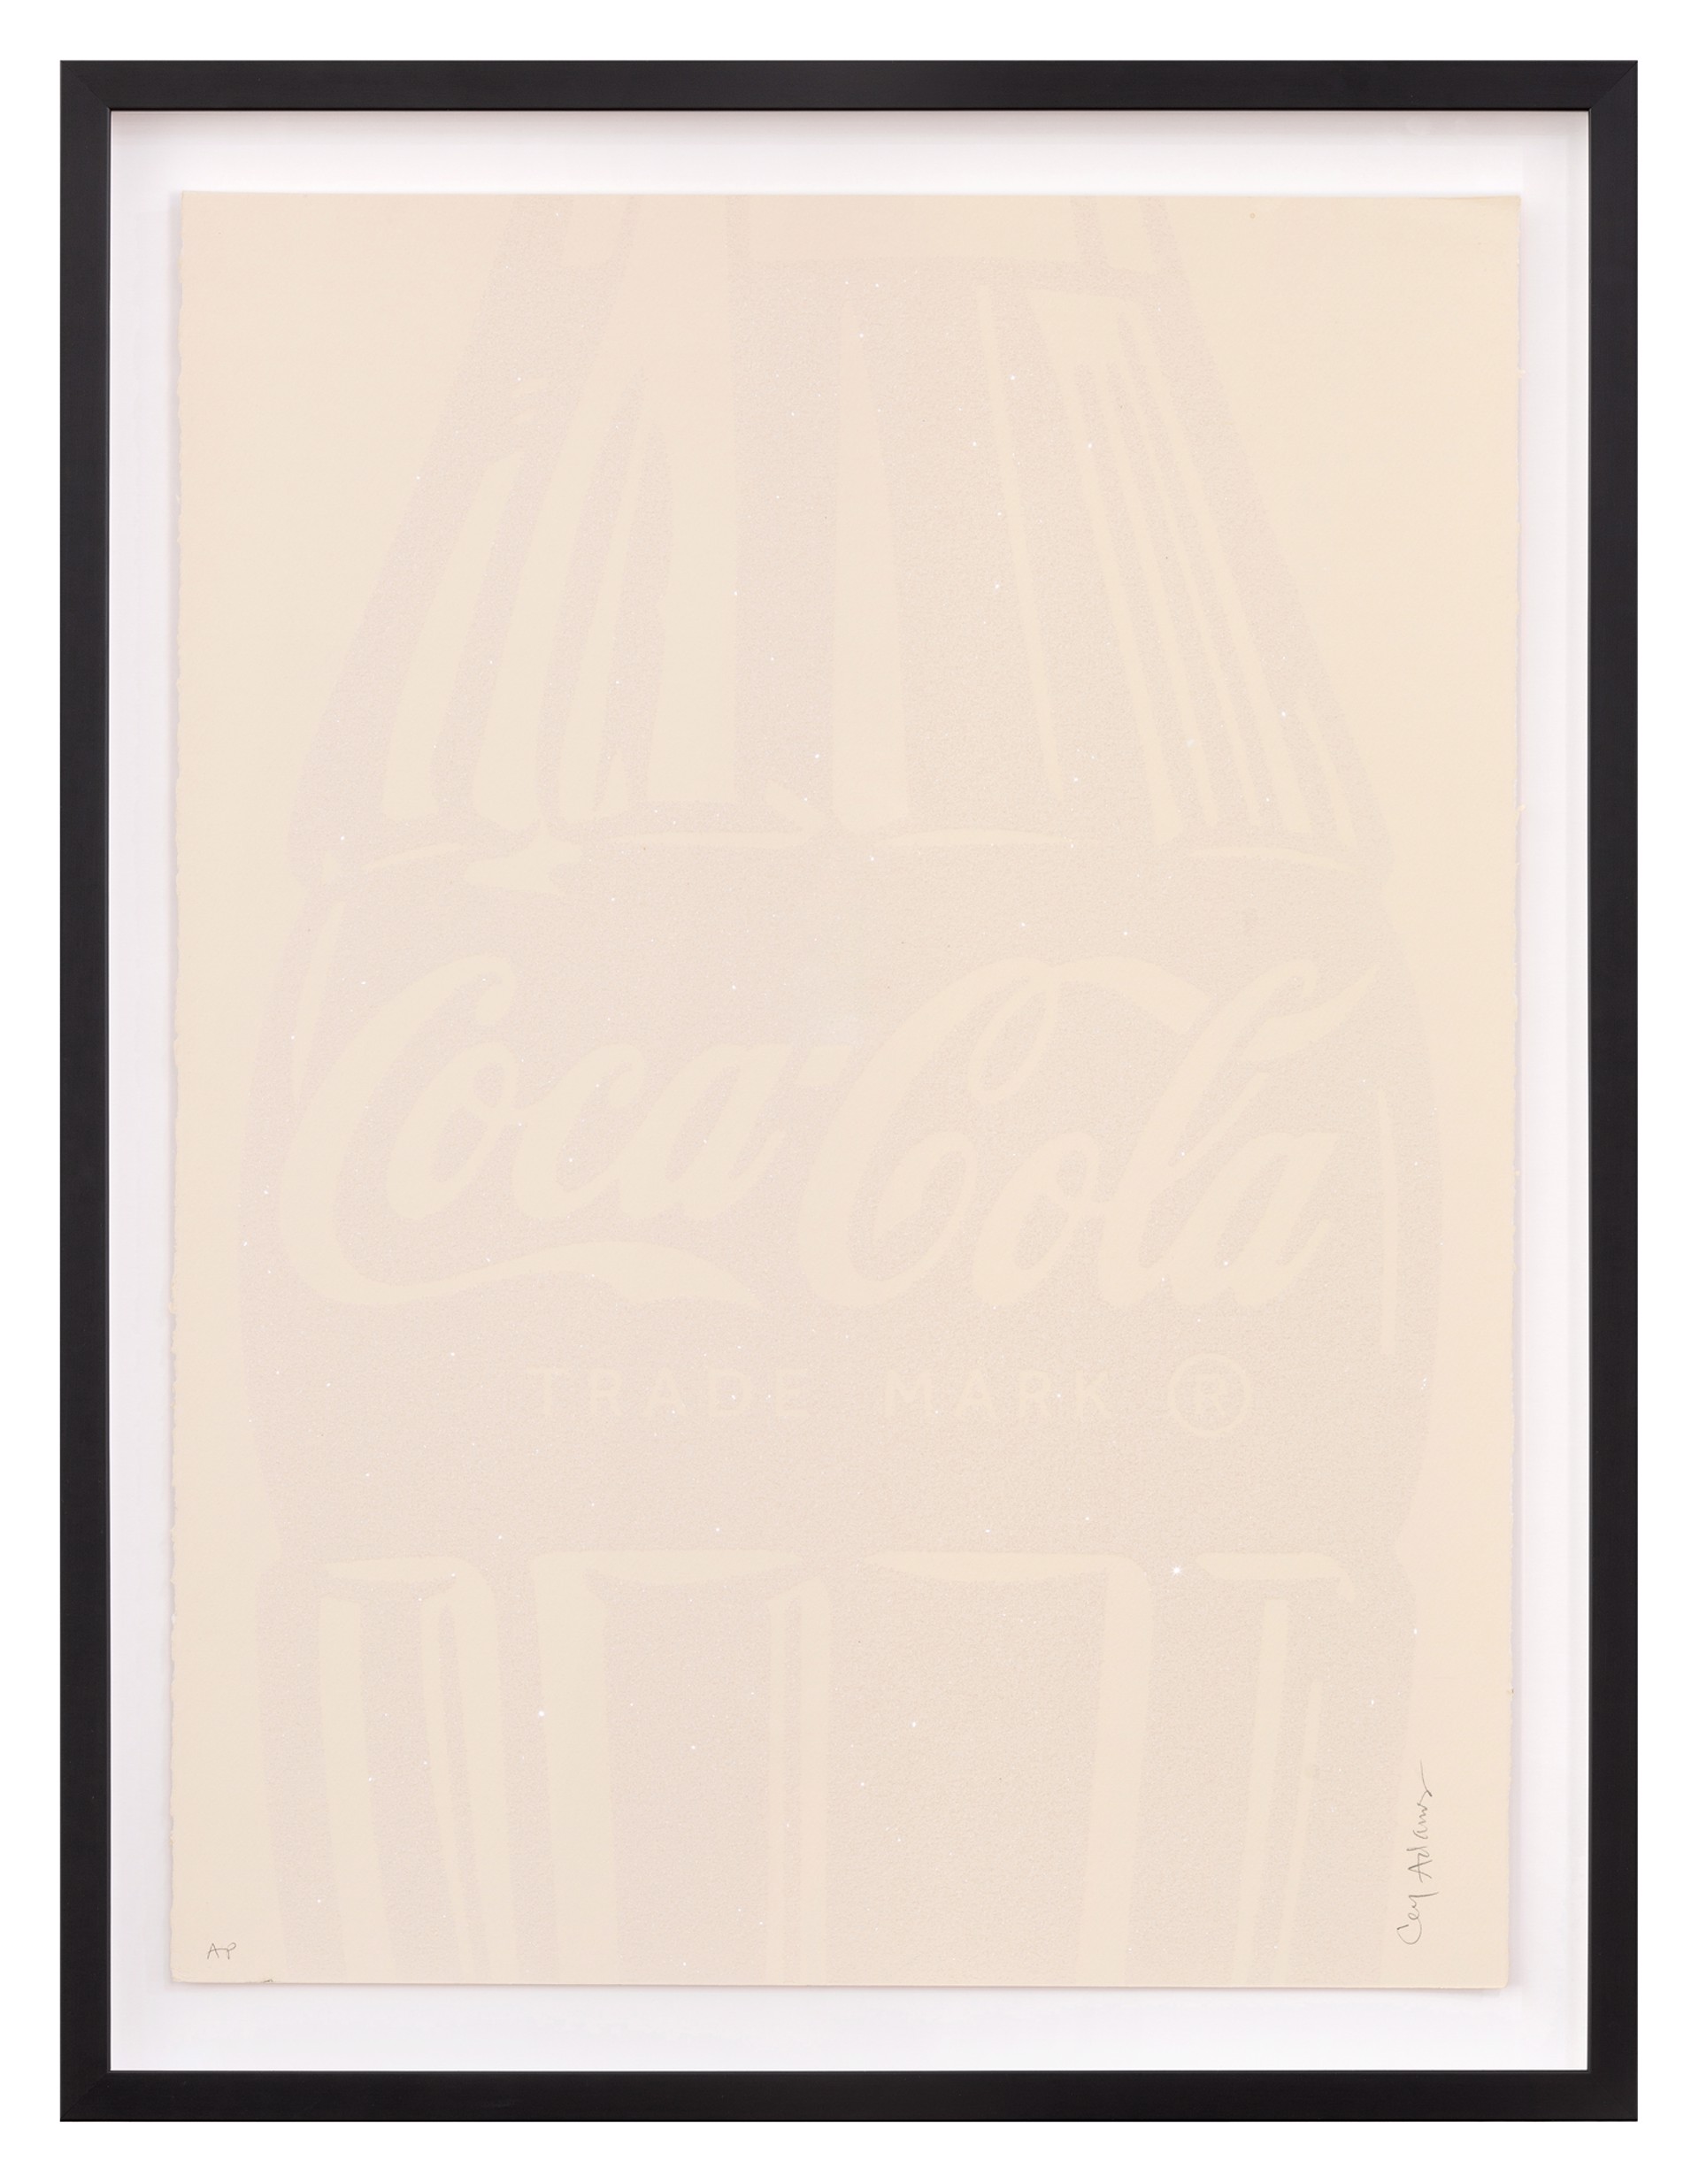 Single Coca-Cola (white on ivory) by Cey Adams